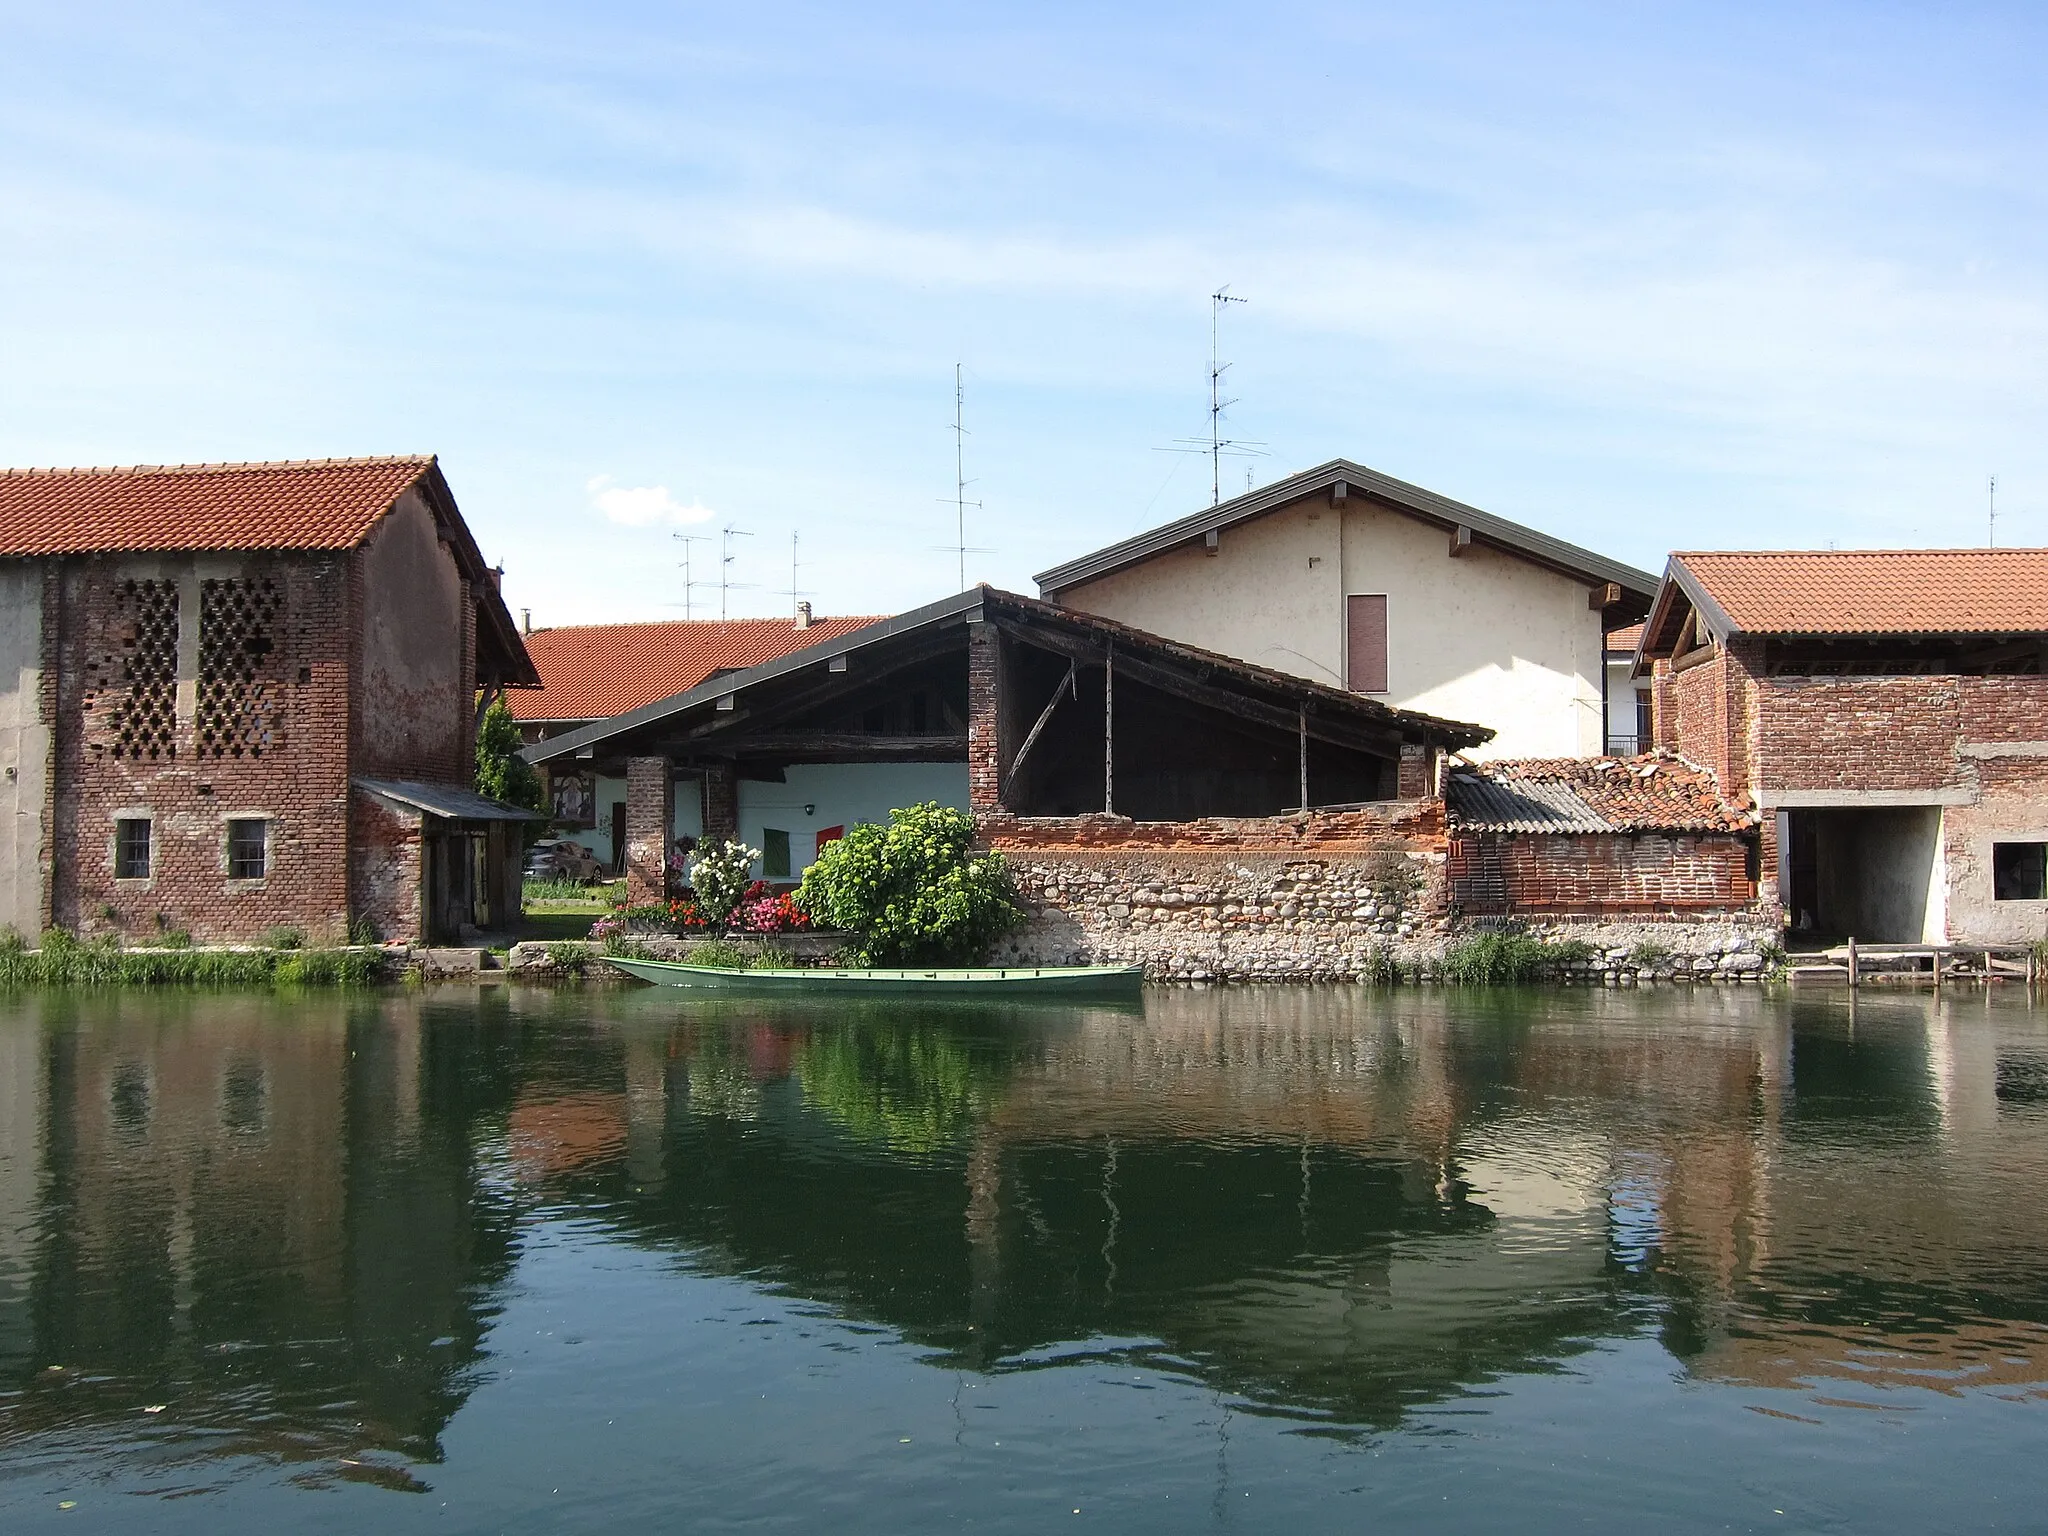 Photo showing: Old bricks buildings and a docked row boat on the coast of the canal Naviglio Grande. This place is located in the municipality of Bernate Ticino in the Province of Milan in Lombardy in Italy. Picture taken on the 24th of May 2020.   2020-05-24